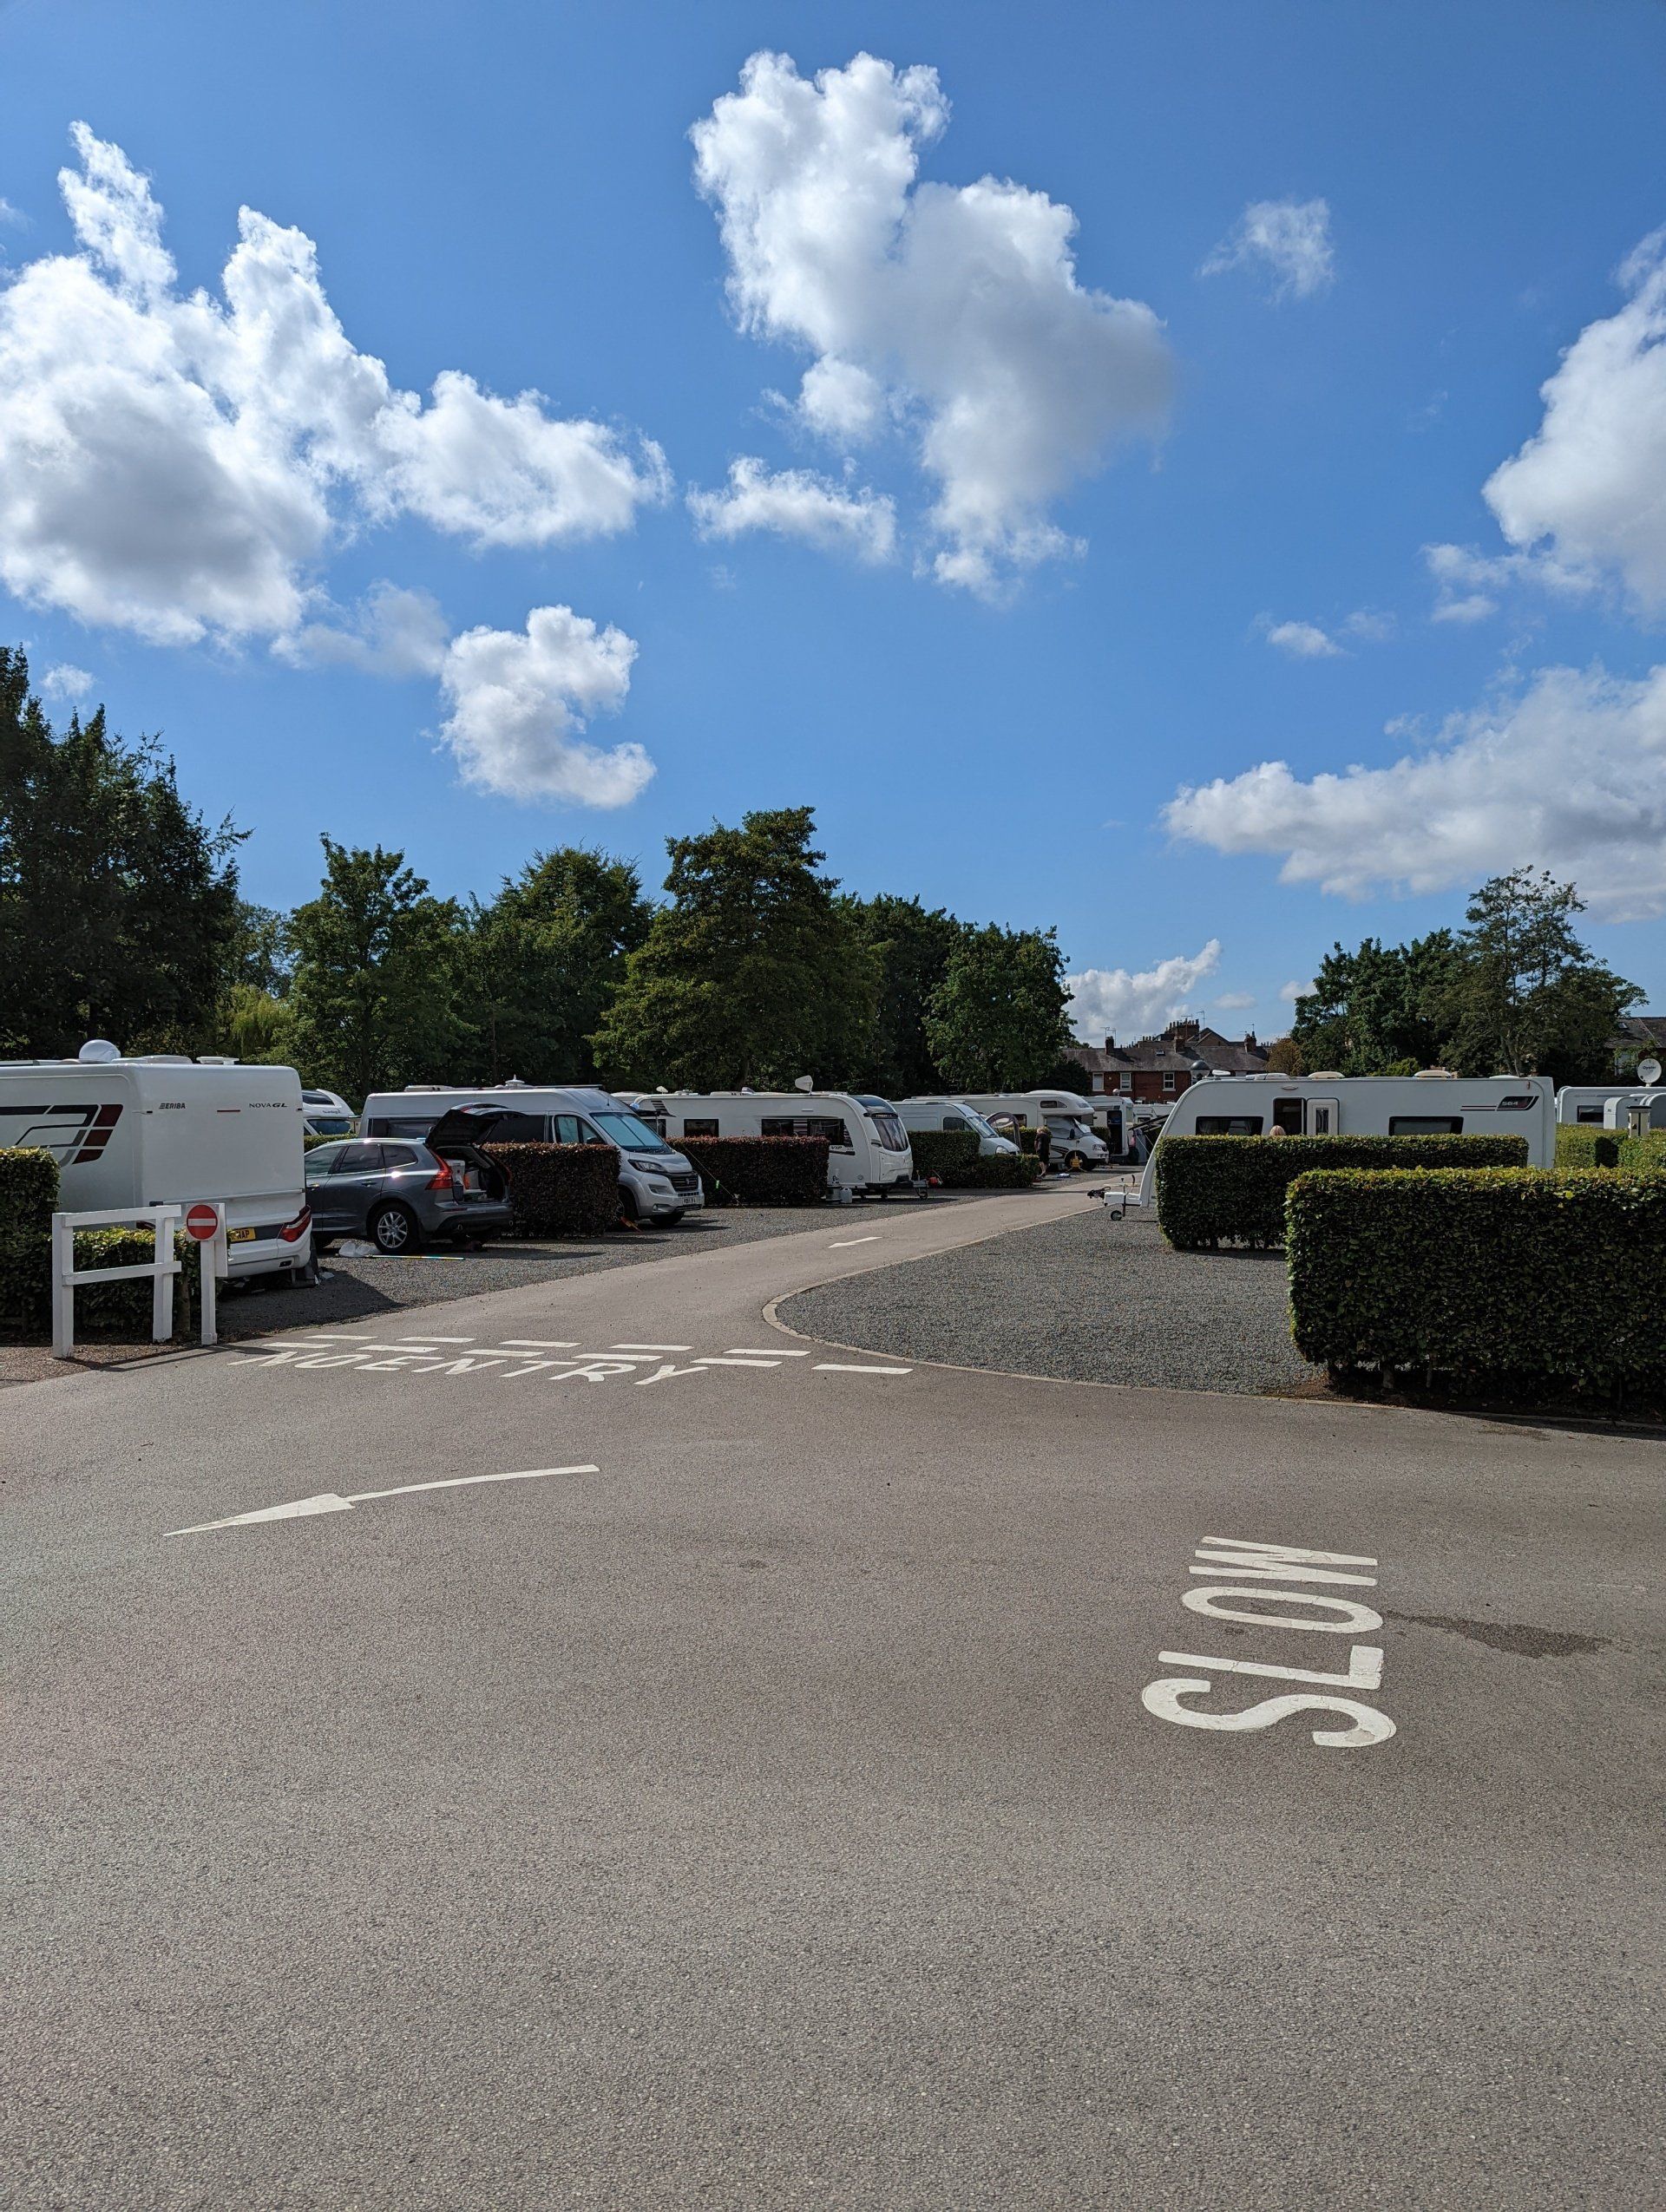 A holiday park with parked up caravan homes